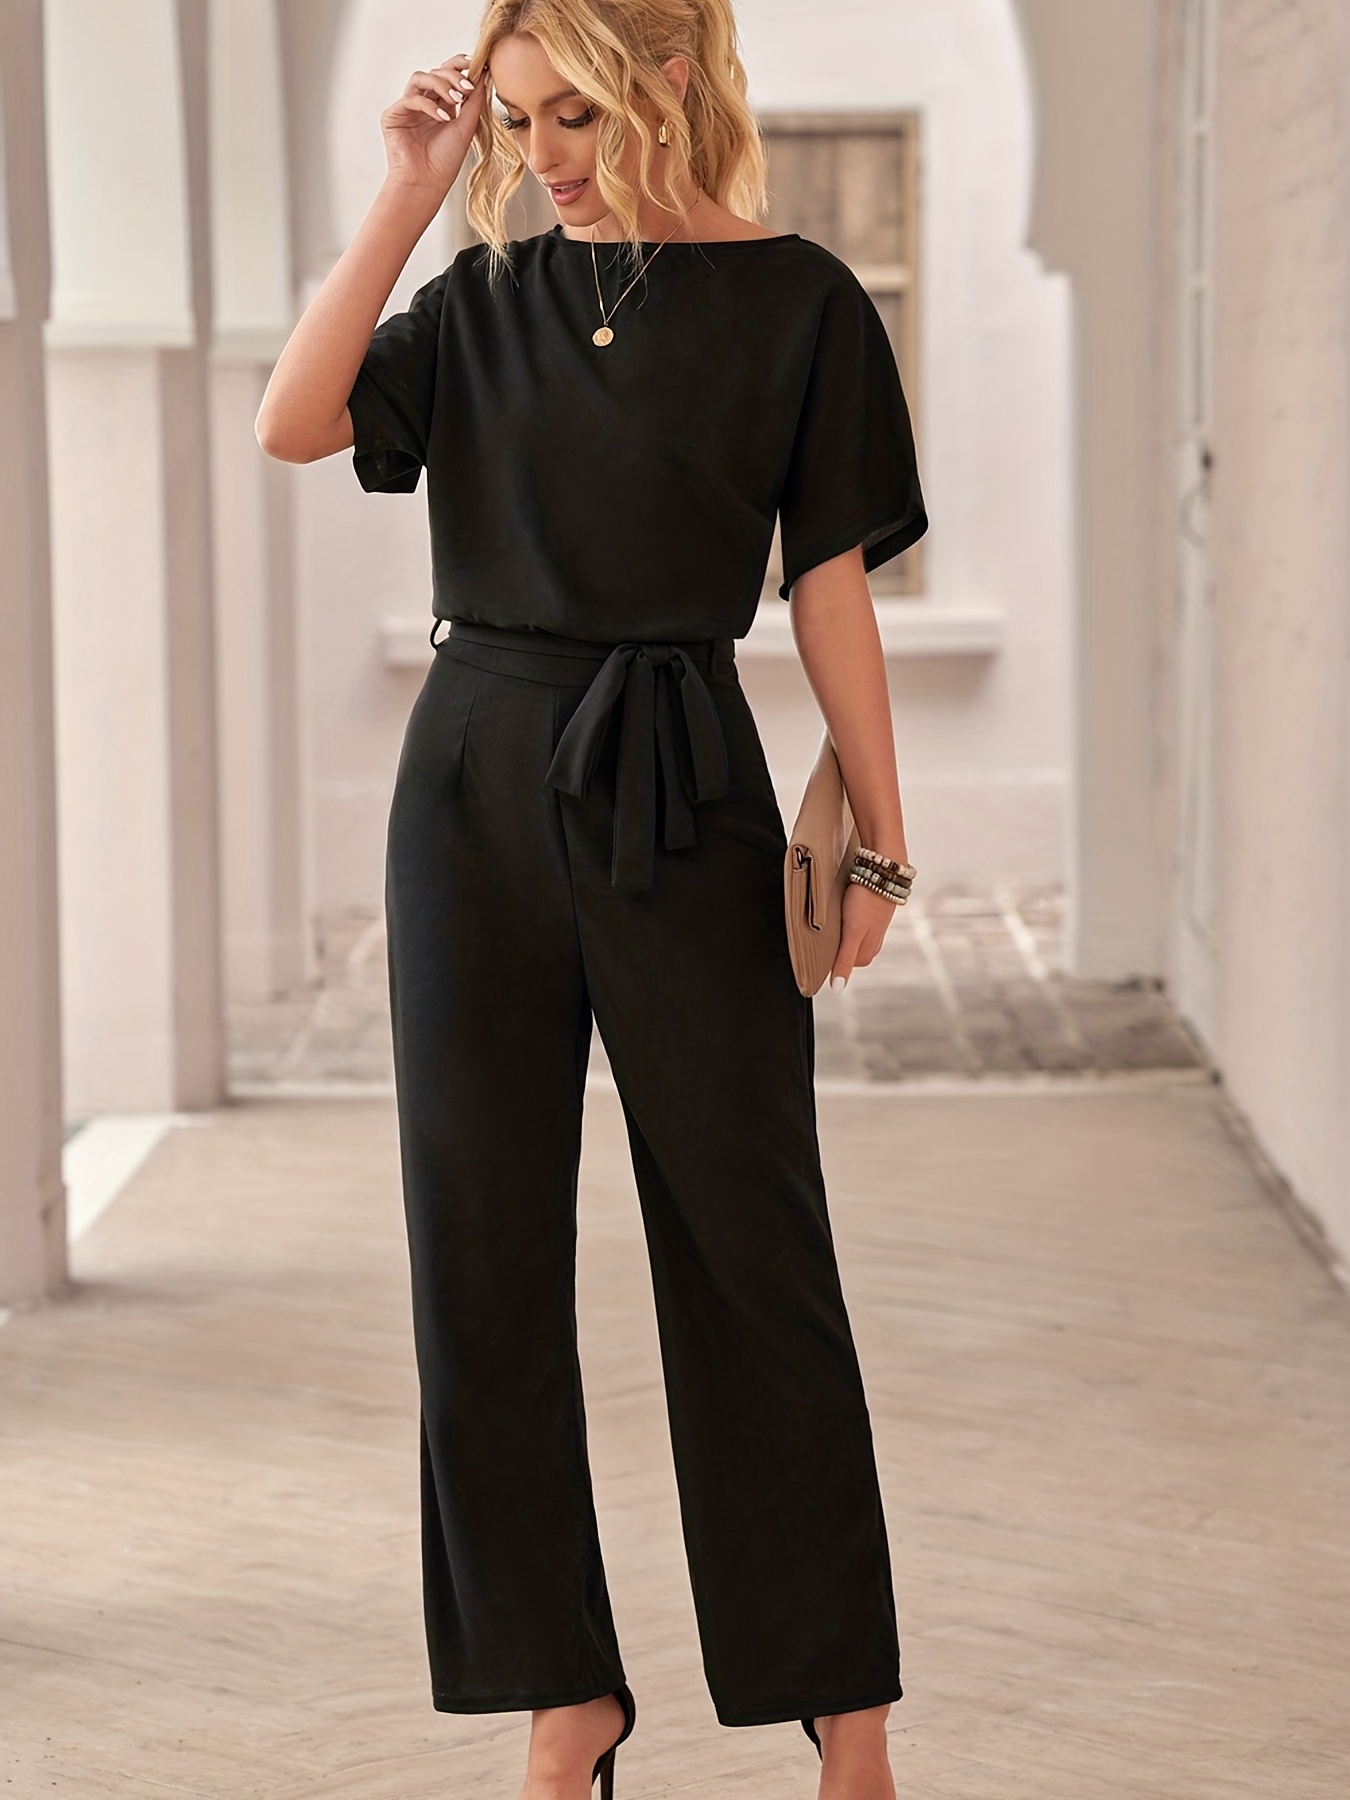 jumpsuits for girls: Best-selling jumpsuits for girls - The Economic Times